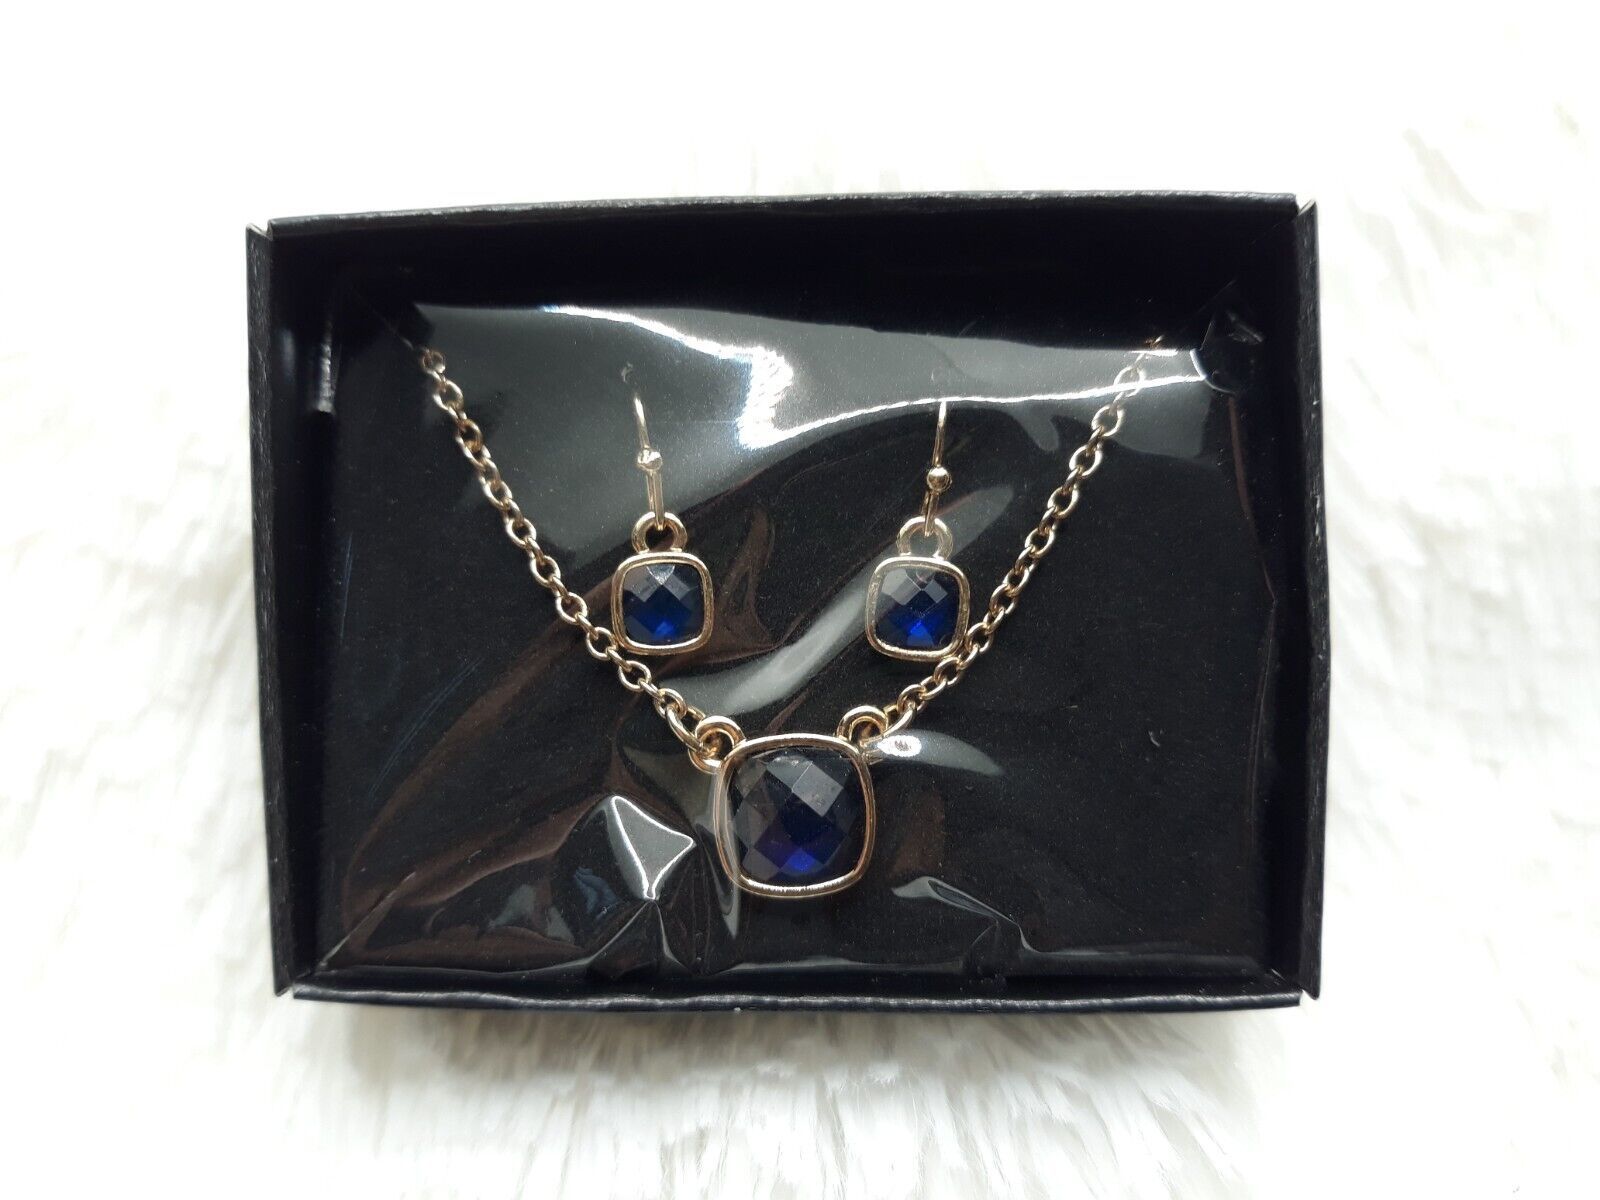 Primary image for AVON COLORFUL METALS PENDANT NECKLACE AND EARRING GIFT SET (BLUE) NEW SEALED!!!